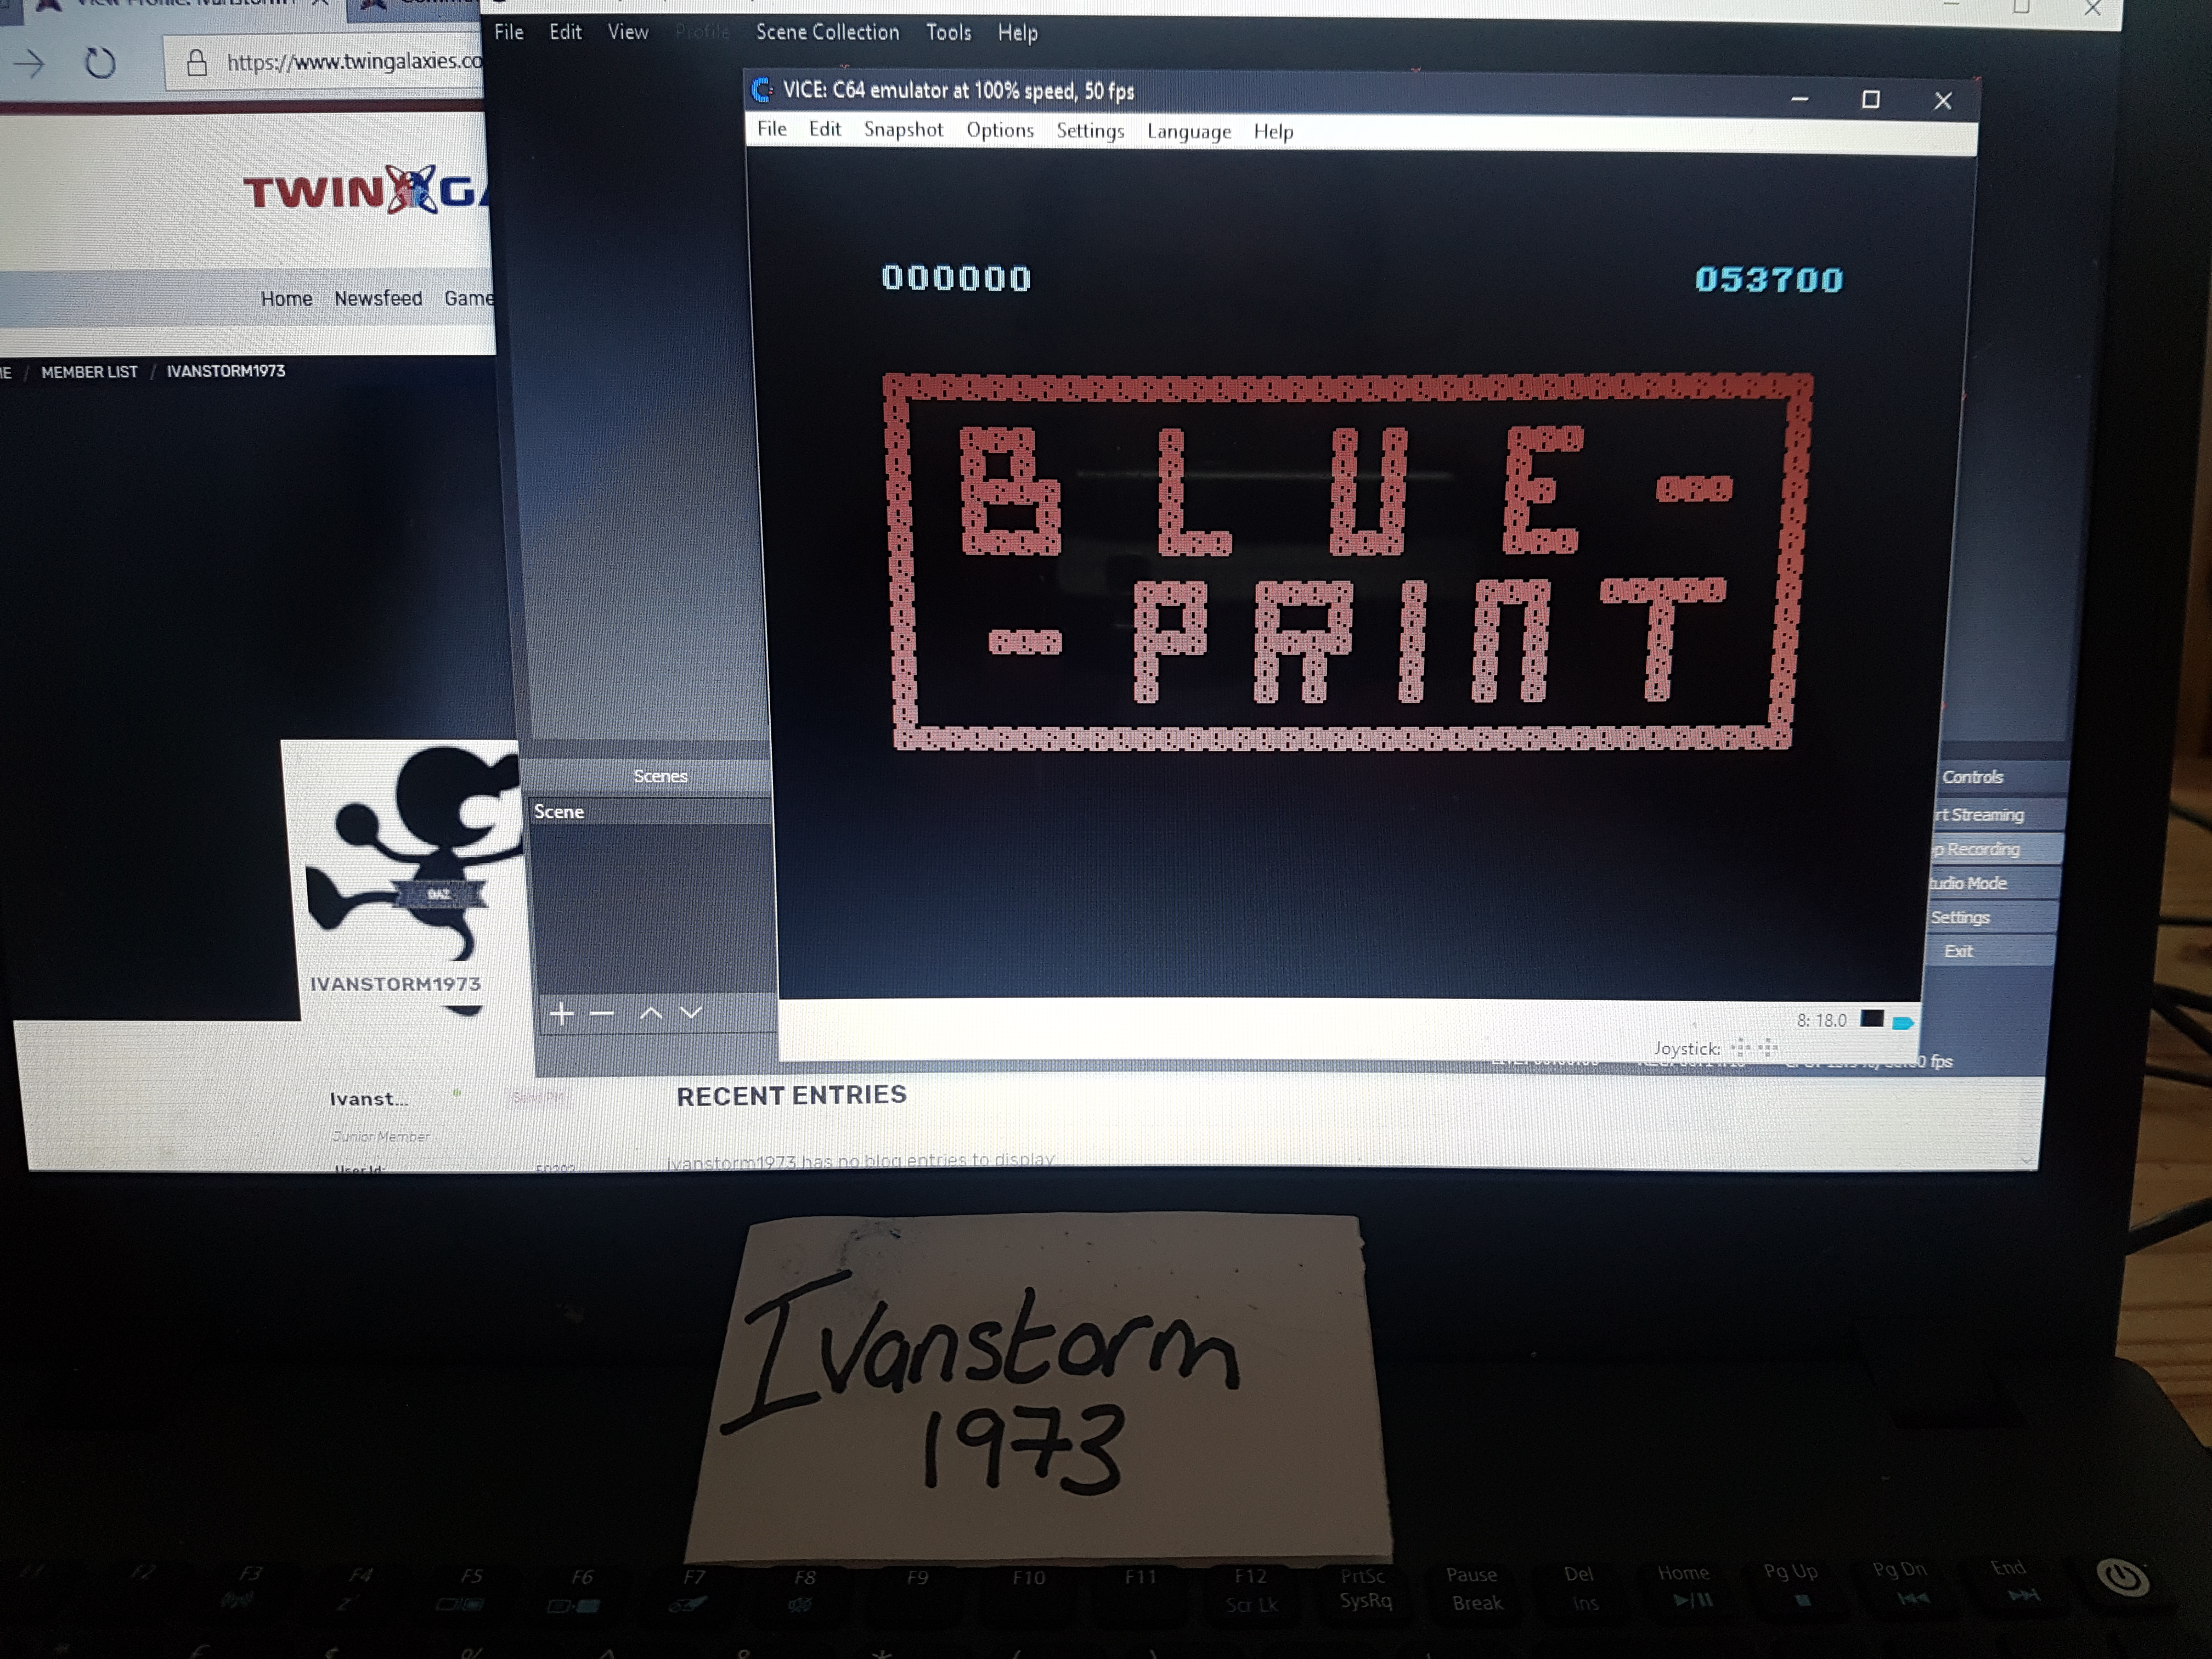 Ivanstorm1973: Blue Print (Commodore 64 Emulated) 53,700 points on 2018-03-18 11:10:00